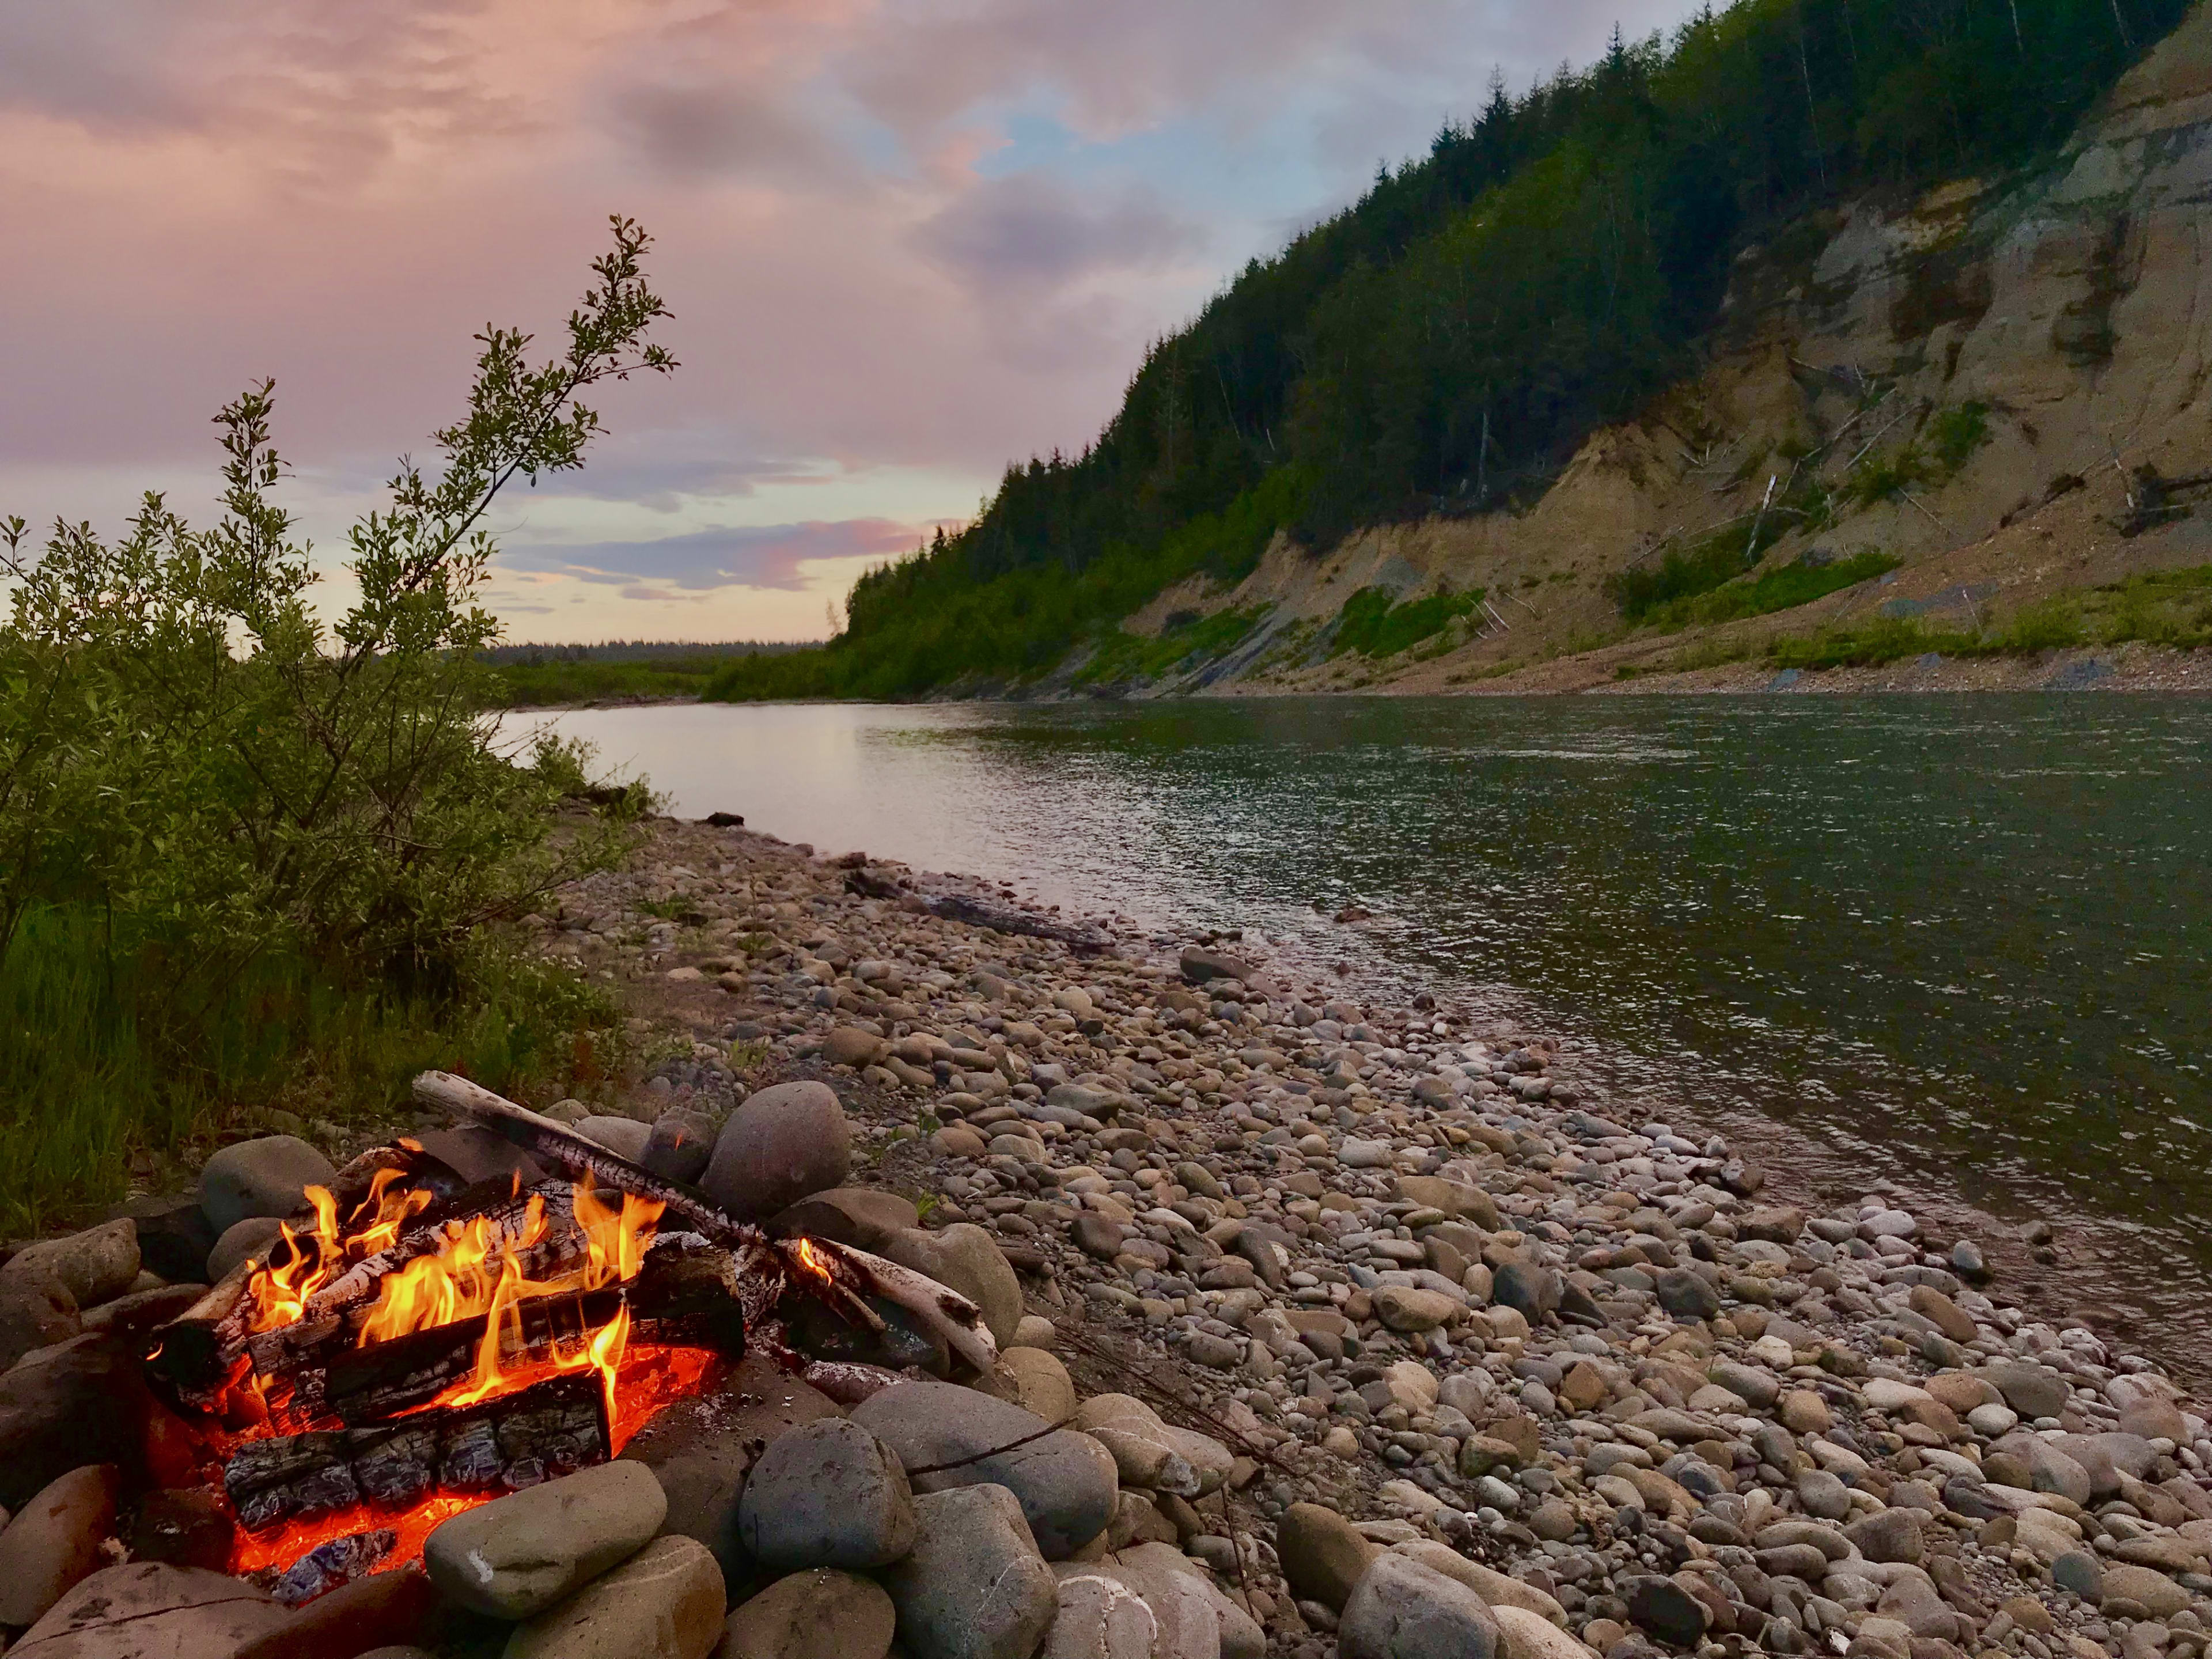 Relax by the river all night. Grab your cooler, camping chair, snacks and chill out by the river with a campfire and natural beauty. The river is a short walk away from camp. Fire pit located in designated area. 